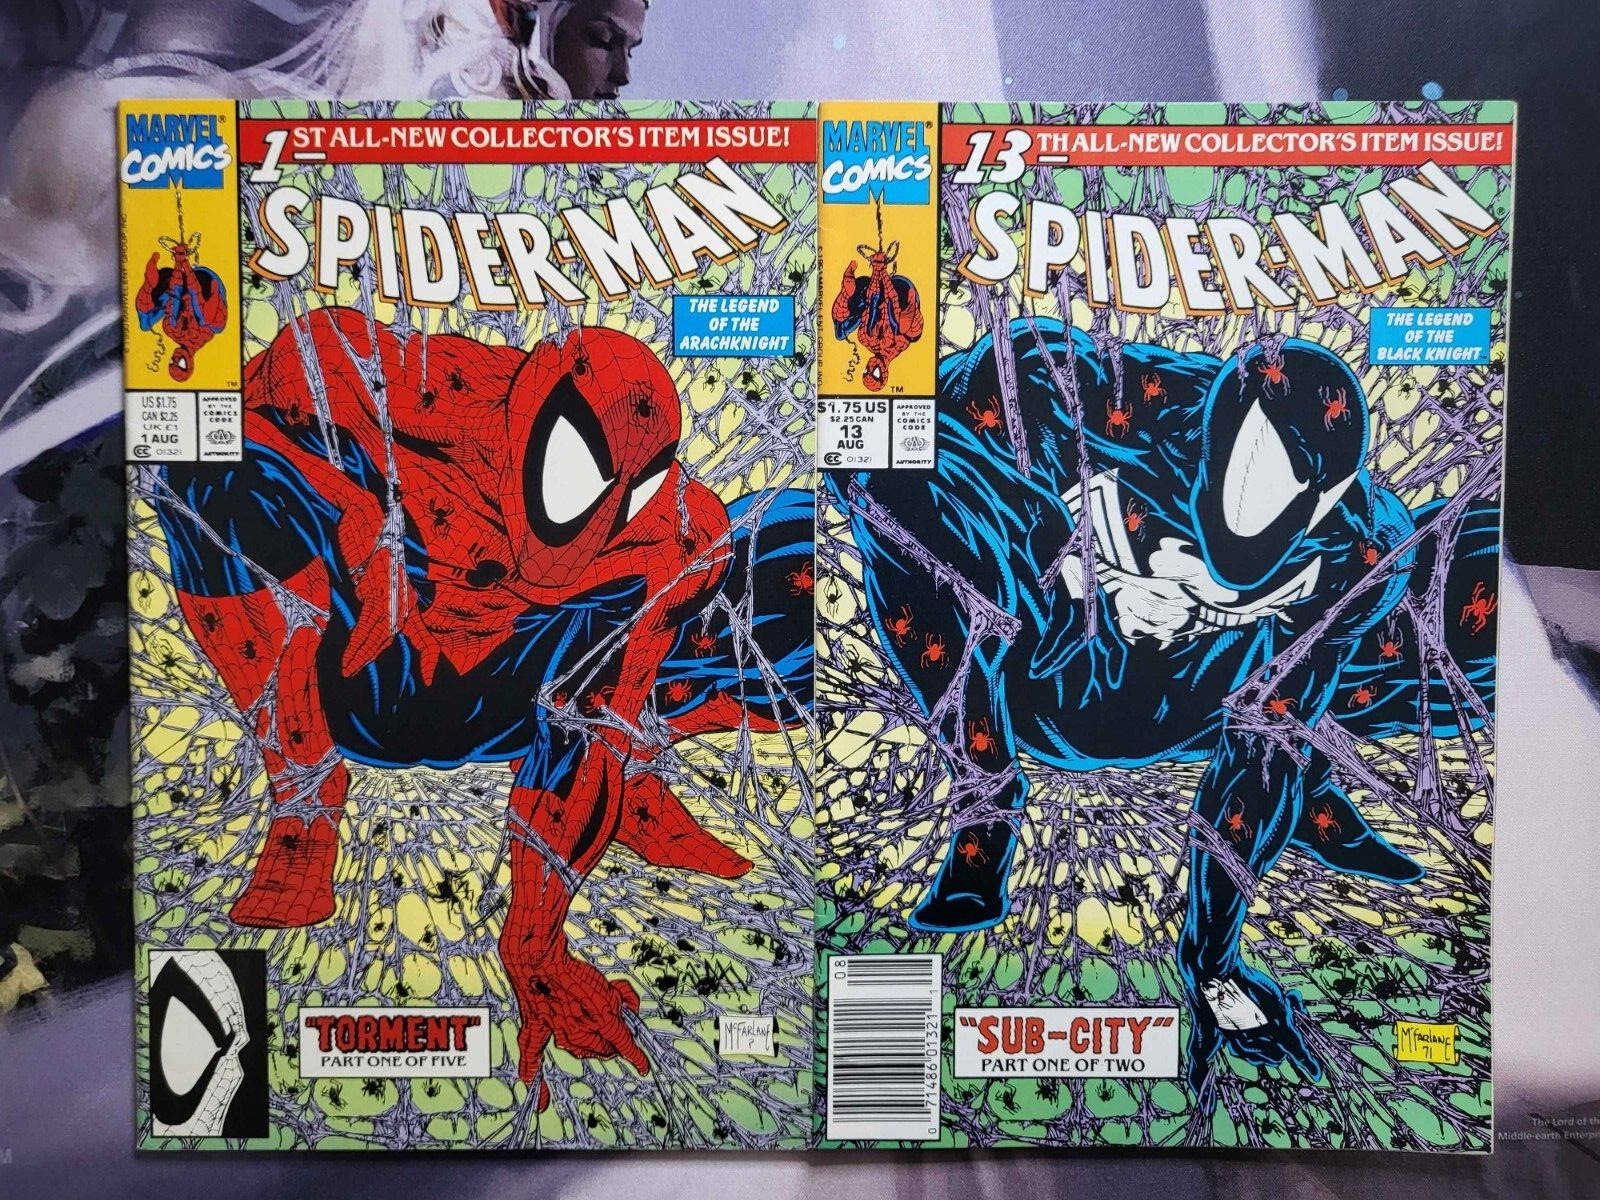 Spider-Man #1 (1990), + Spider-Man #13 (1991), 2 Iconic Todd McFarlane Covers 